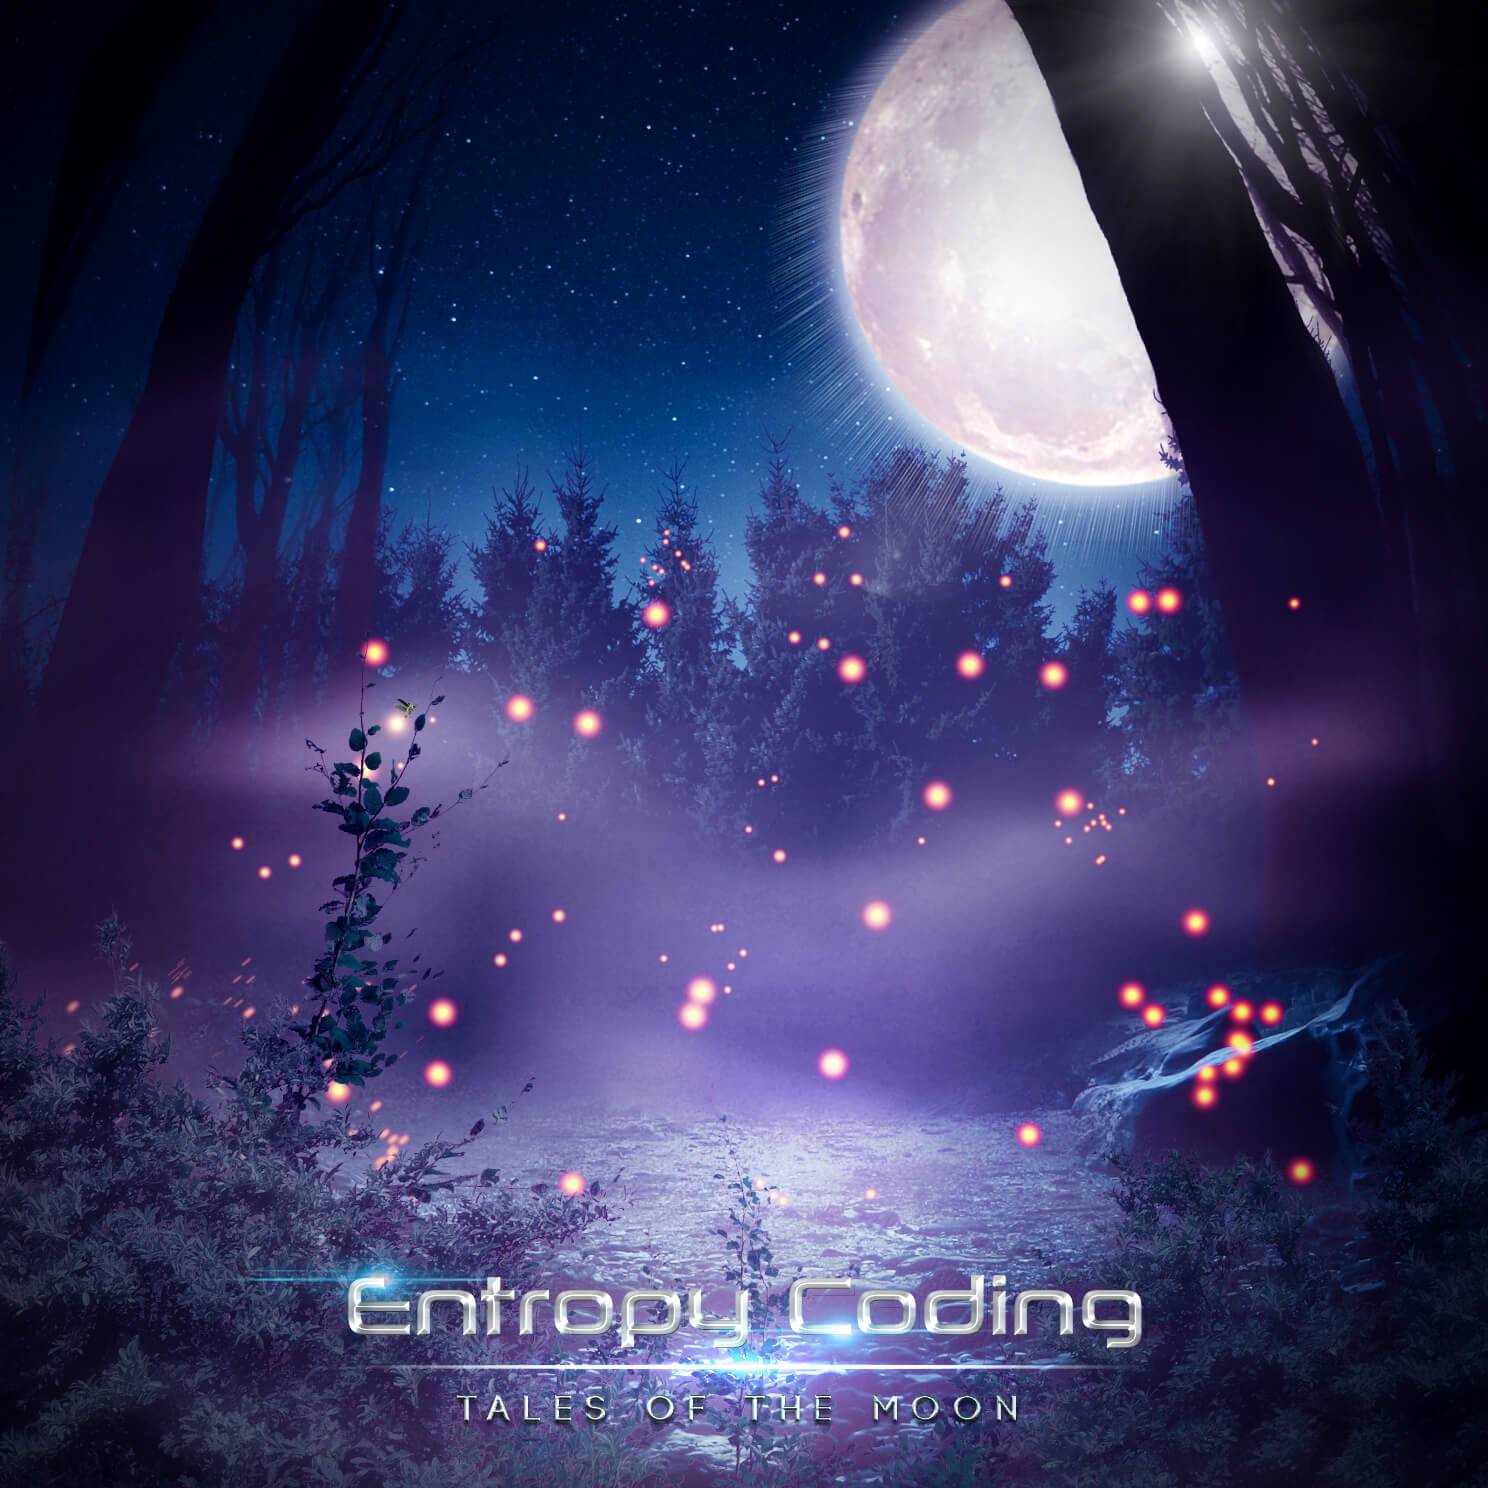 Entropy Coding : "Tales Of The Moon" Digital album 19th January 2018 Agoge Records .